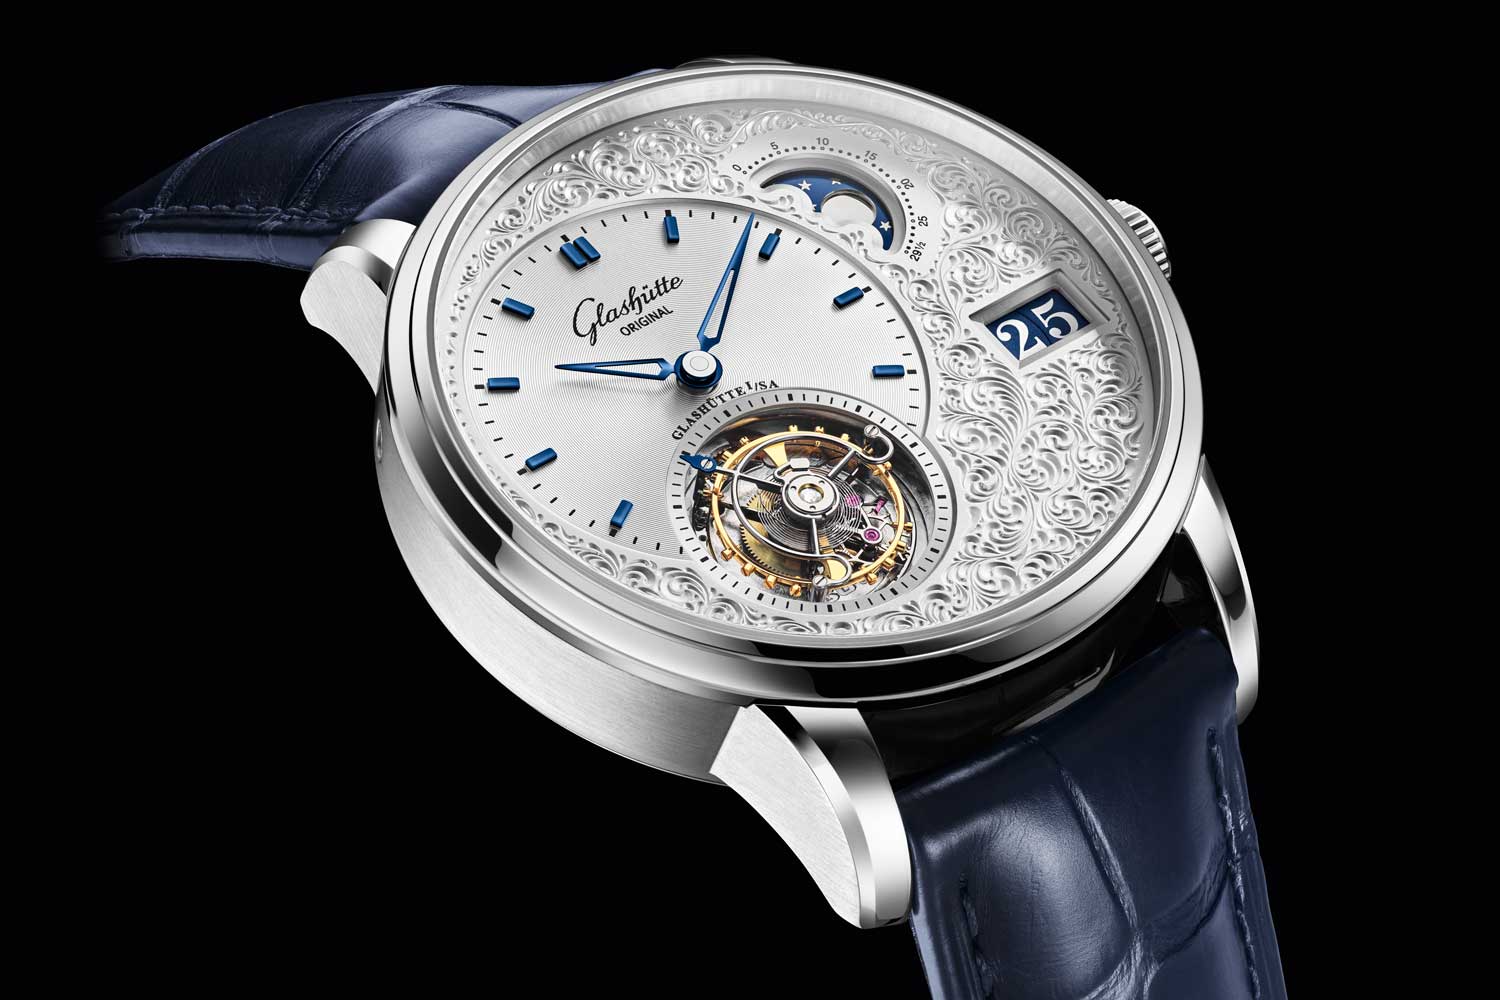 The PanoLunarTourbillon features hours, minutes, flying tourbillon with small seconds, Panorama Date, moonphase display, with a power reserve of 48 hours. A limited-edition of 25 pieces